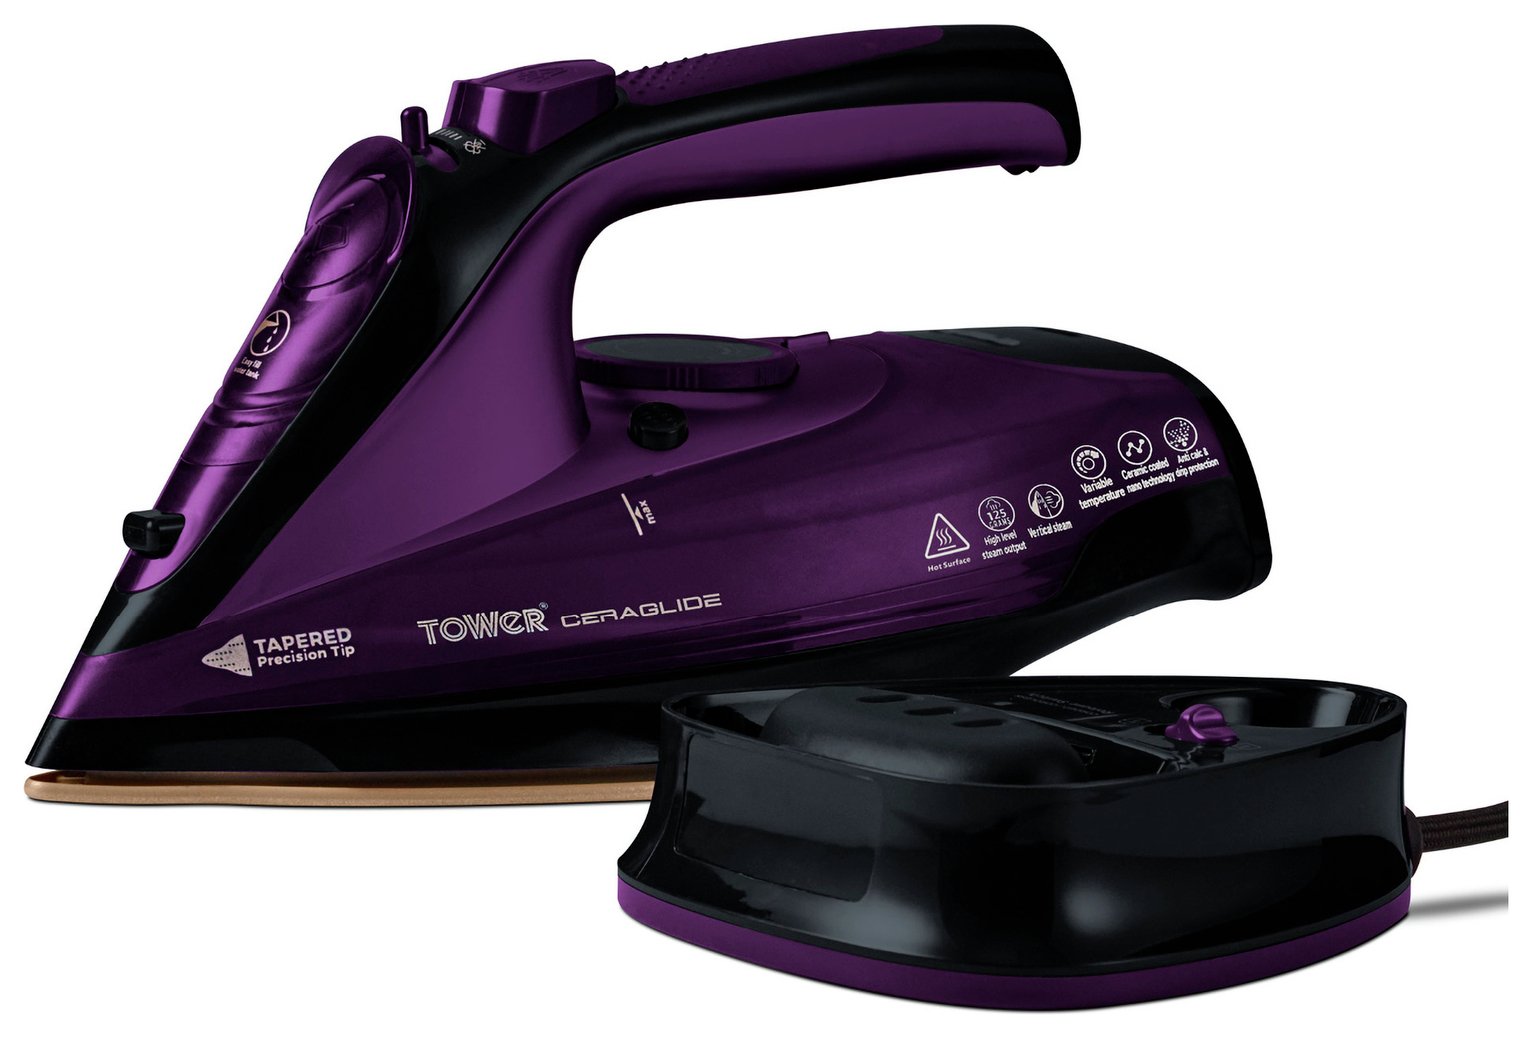 Tower T22008 CeraGlide Cord Cordless 2-in-1 Steam Iron